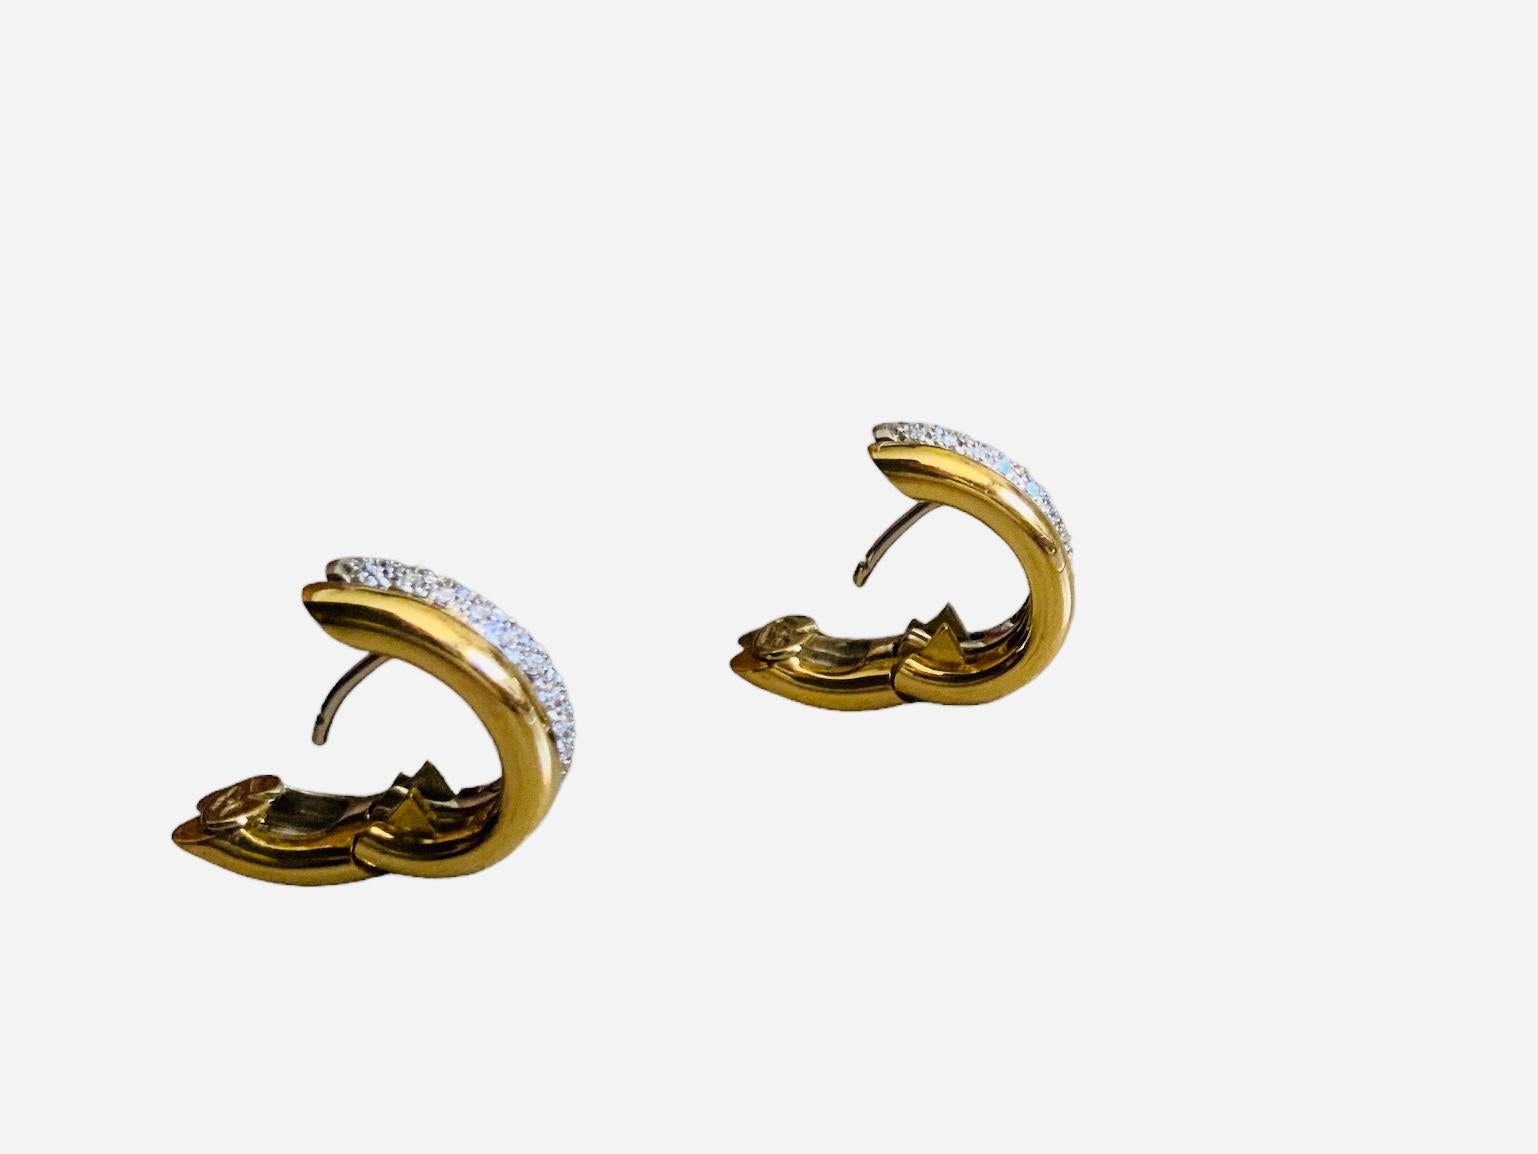 This is a Leo Pizzo 18K/750 white and yellow gold diamonds pair of earrings. It depicts a double oval hoops earrings, one, white gold and the other one, yellow gold attached to each other. The white gold hoop is embellished by pave diamonds. Each